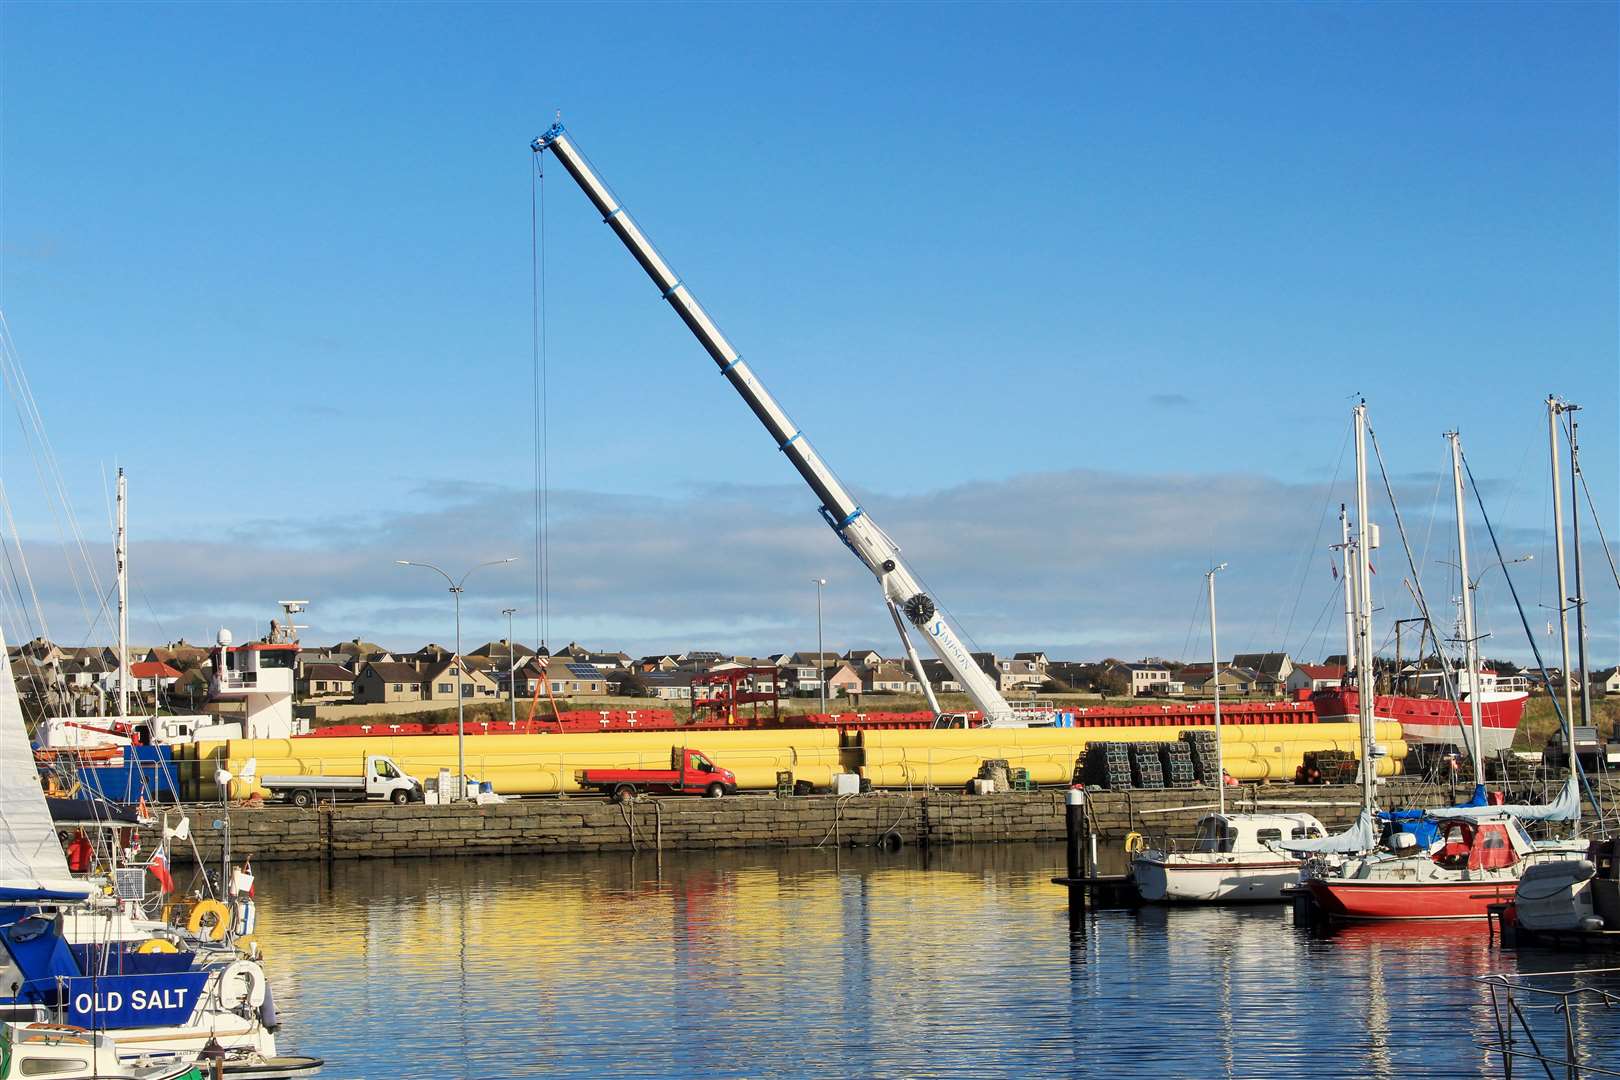 Pipes for the SubSea 7 contract pictured at Wick harbour. Photo by Alan Hendry